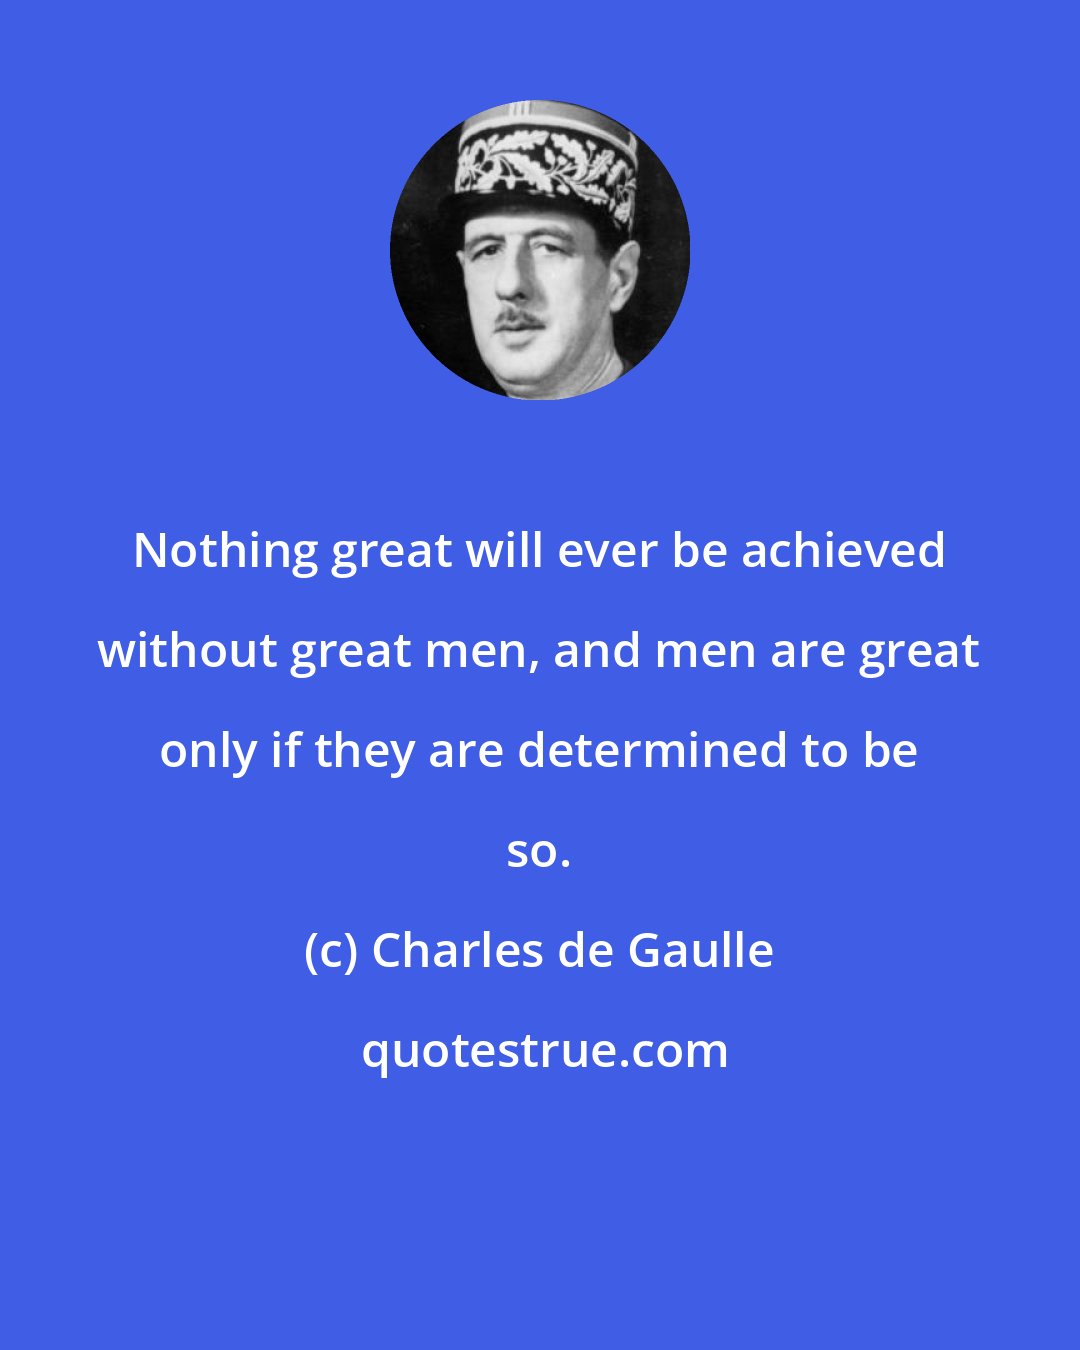 Charles de Gaulle: Nothing great will ever be achieved without great men, and men are great only if they are determined to be so.